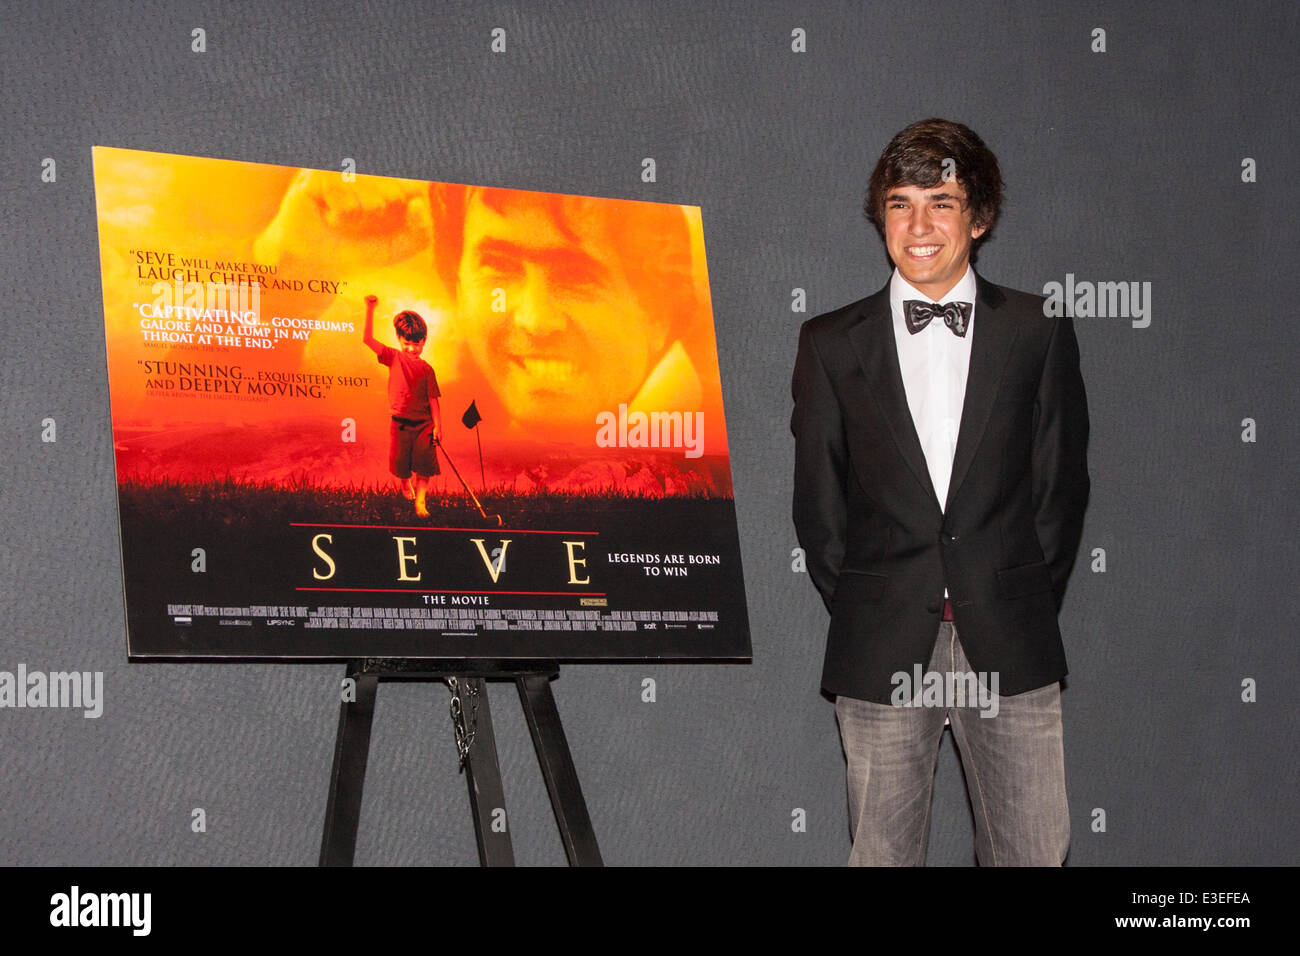 London, UK. 23rd June, 2014. Actor Jose Luis Gutierrez Real who plays a young Seve Ballesteros attends the London premiere of the film Seve, a biopic of the life of the legendary Spanish golfer. Stock Photo